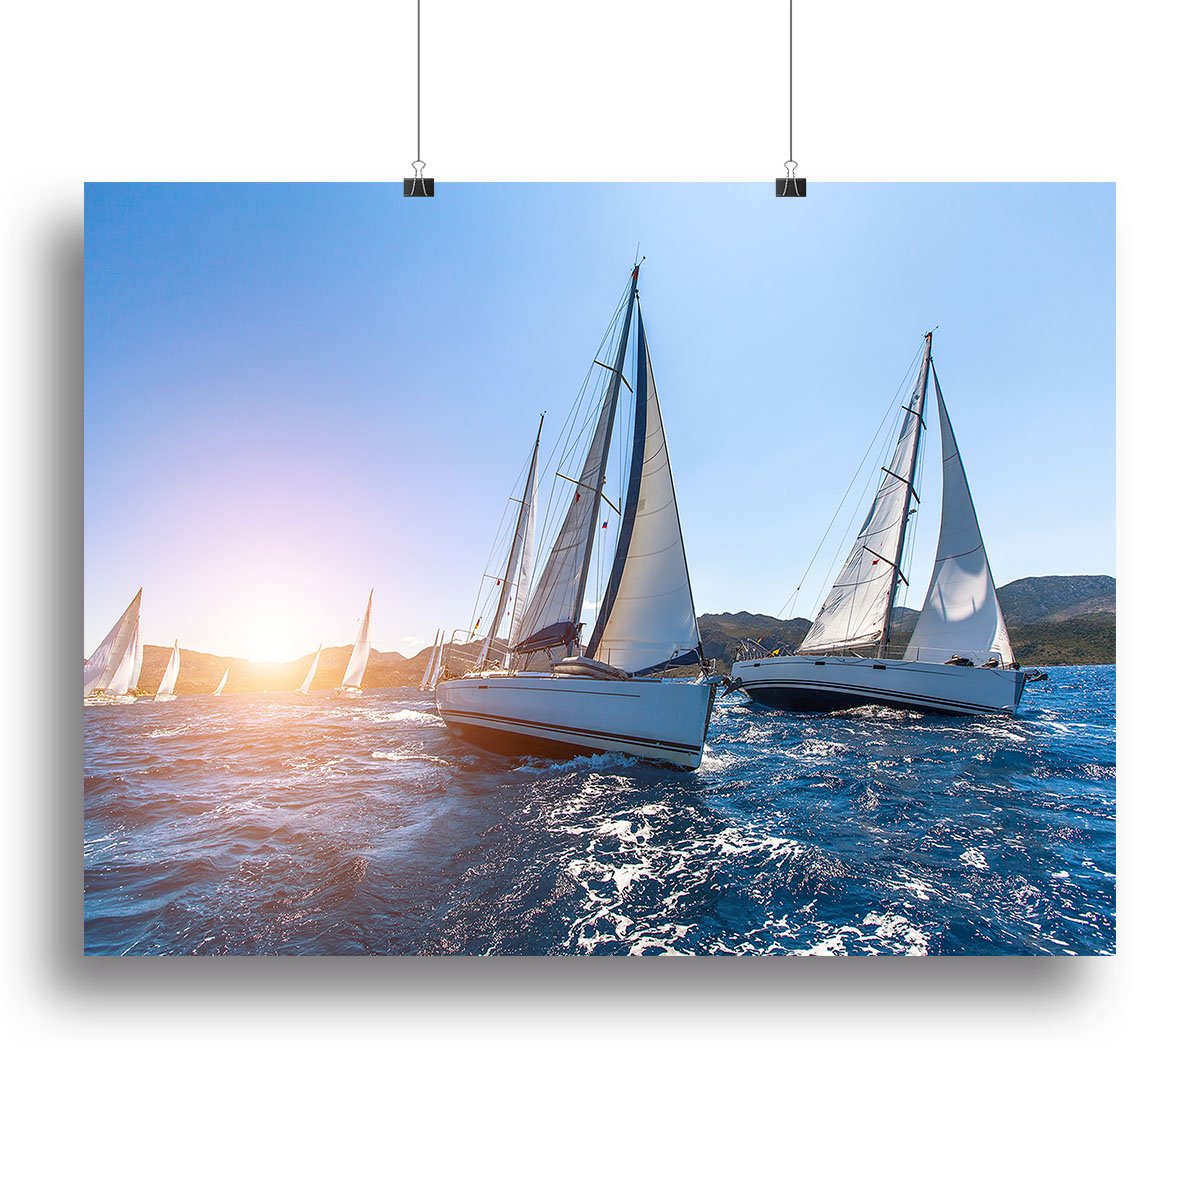 Sailing in the wind through the waves at the Sea Canvas Print or Poster